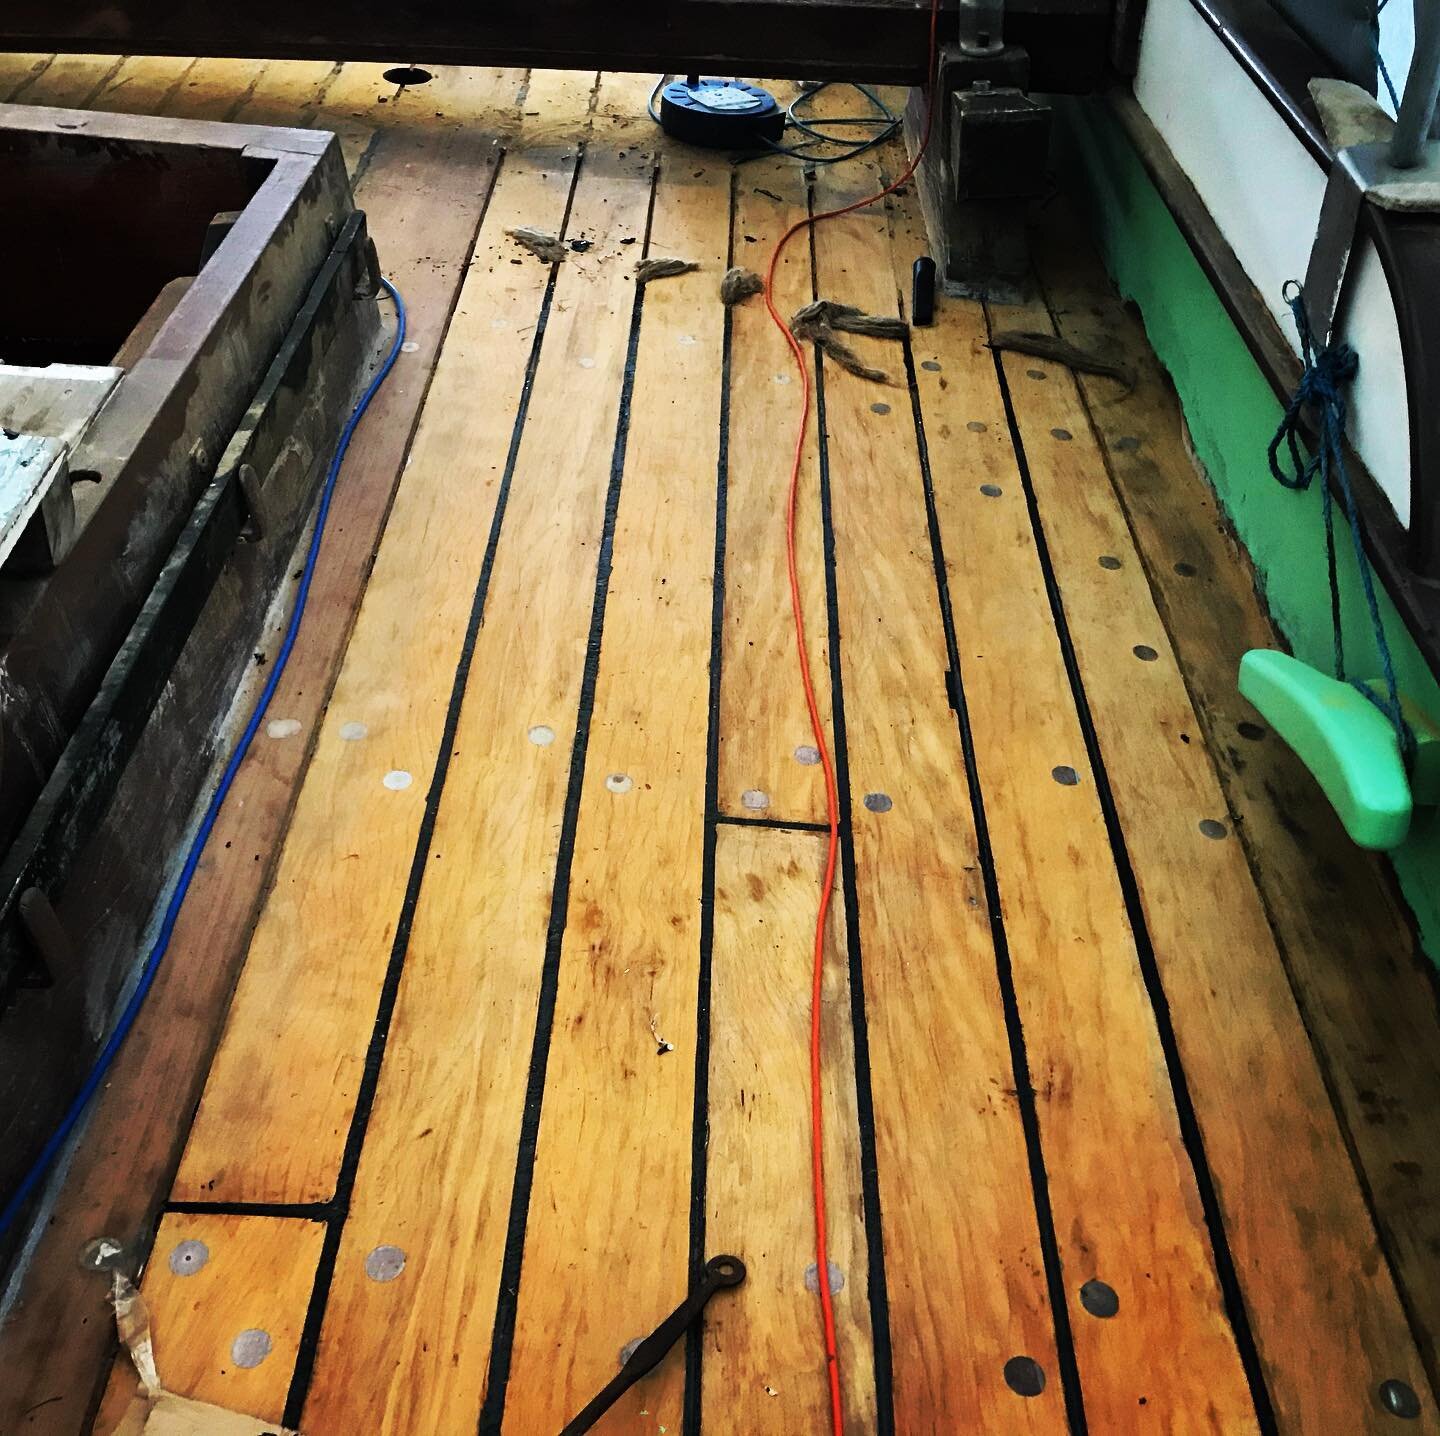 Sometimes in life we think that new is best. This was the case when DAWN was rebuilt and the decision was taken to embrace the modern system of corking a deck.

Thirteen years of fighting deck leaks the decision to rout out the decks to receive the t